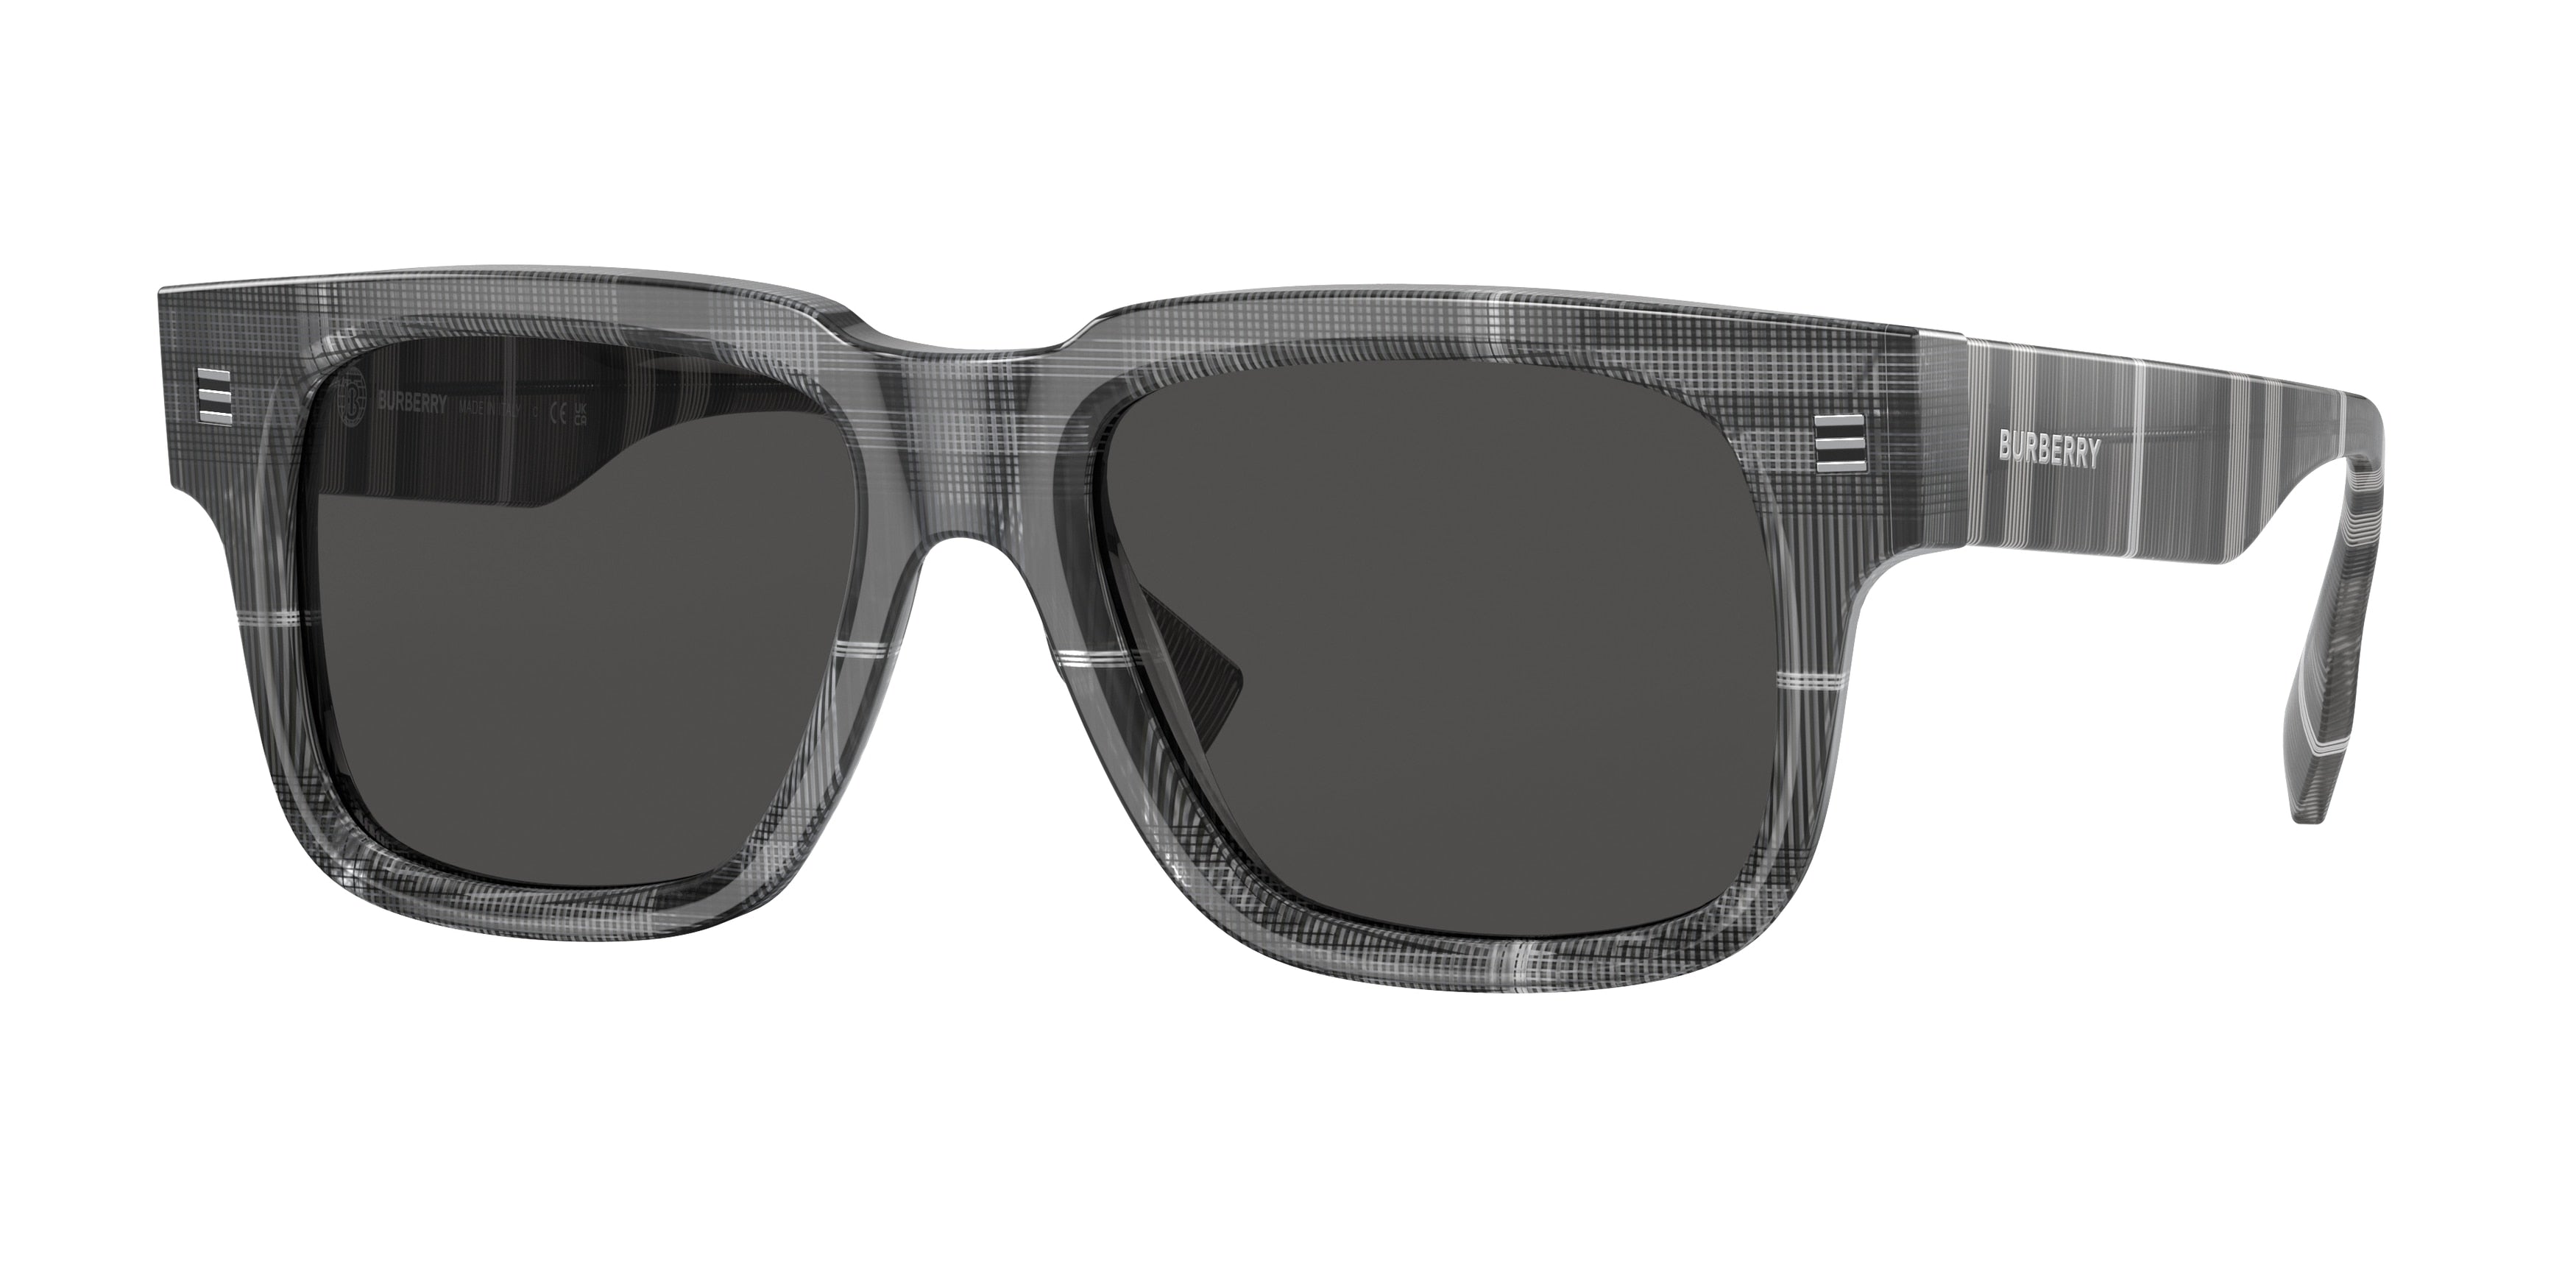 Burberry HAYDEN BE4394F Square Sunglasses  380487-Charcoal Check 54-150-18 - Color Map Grey